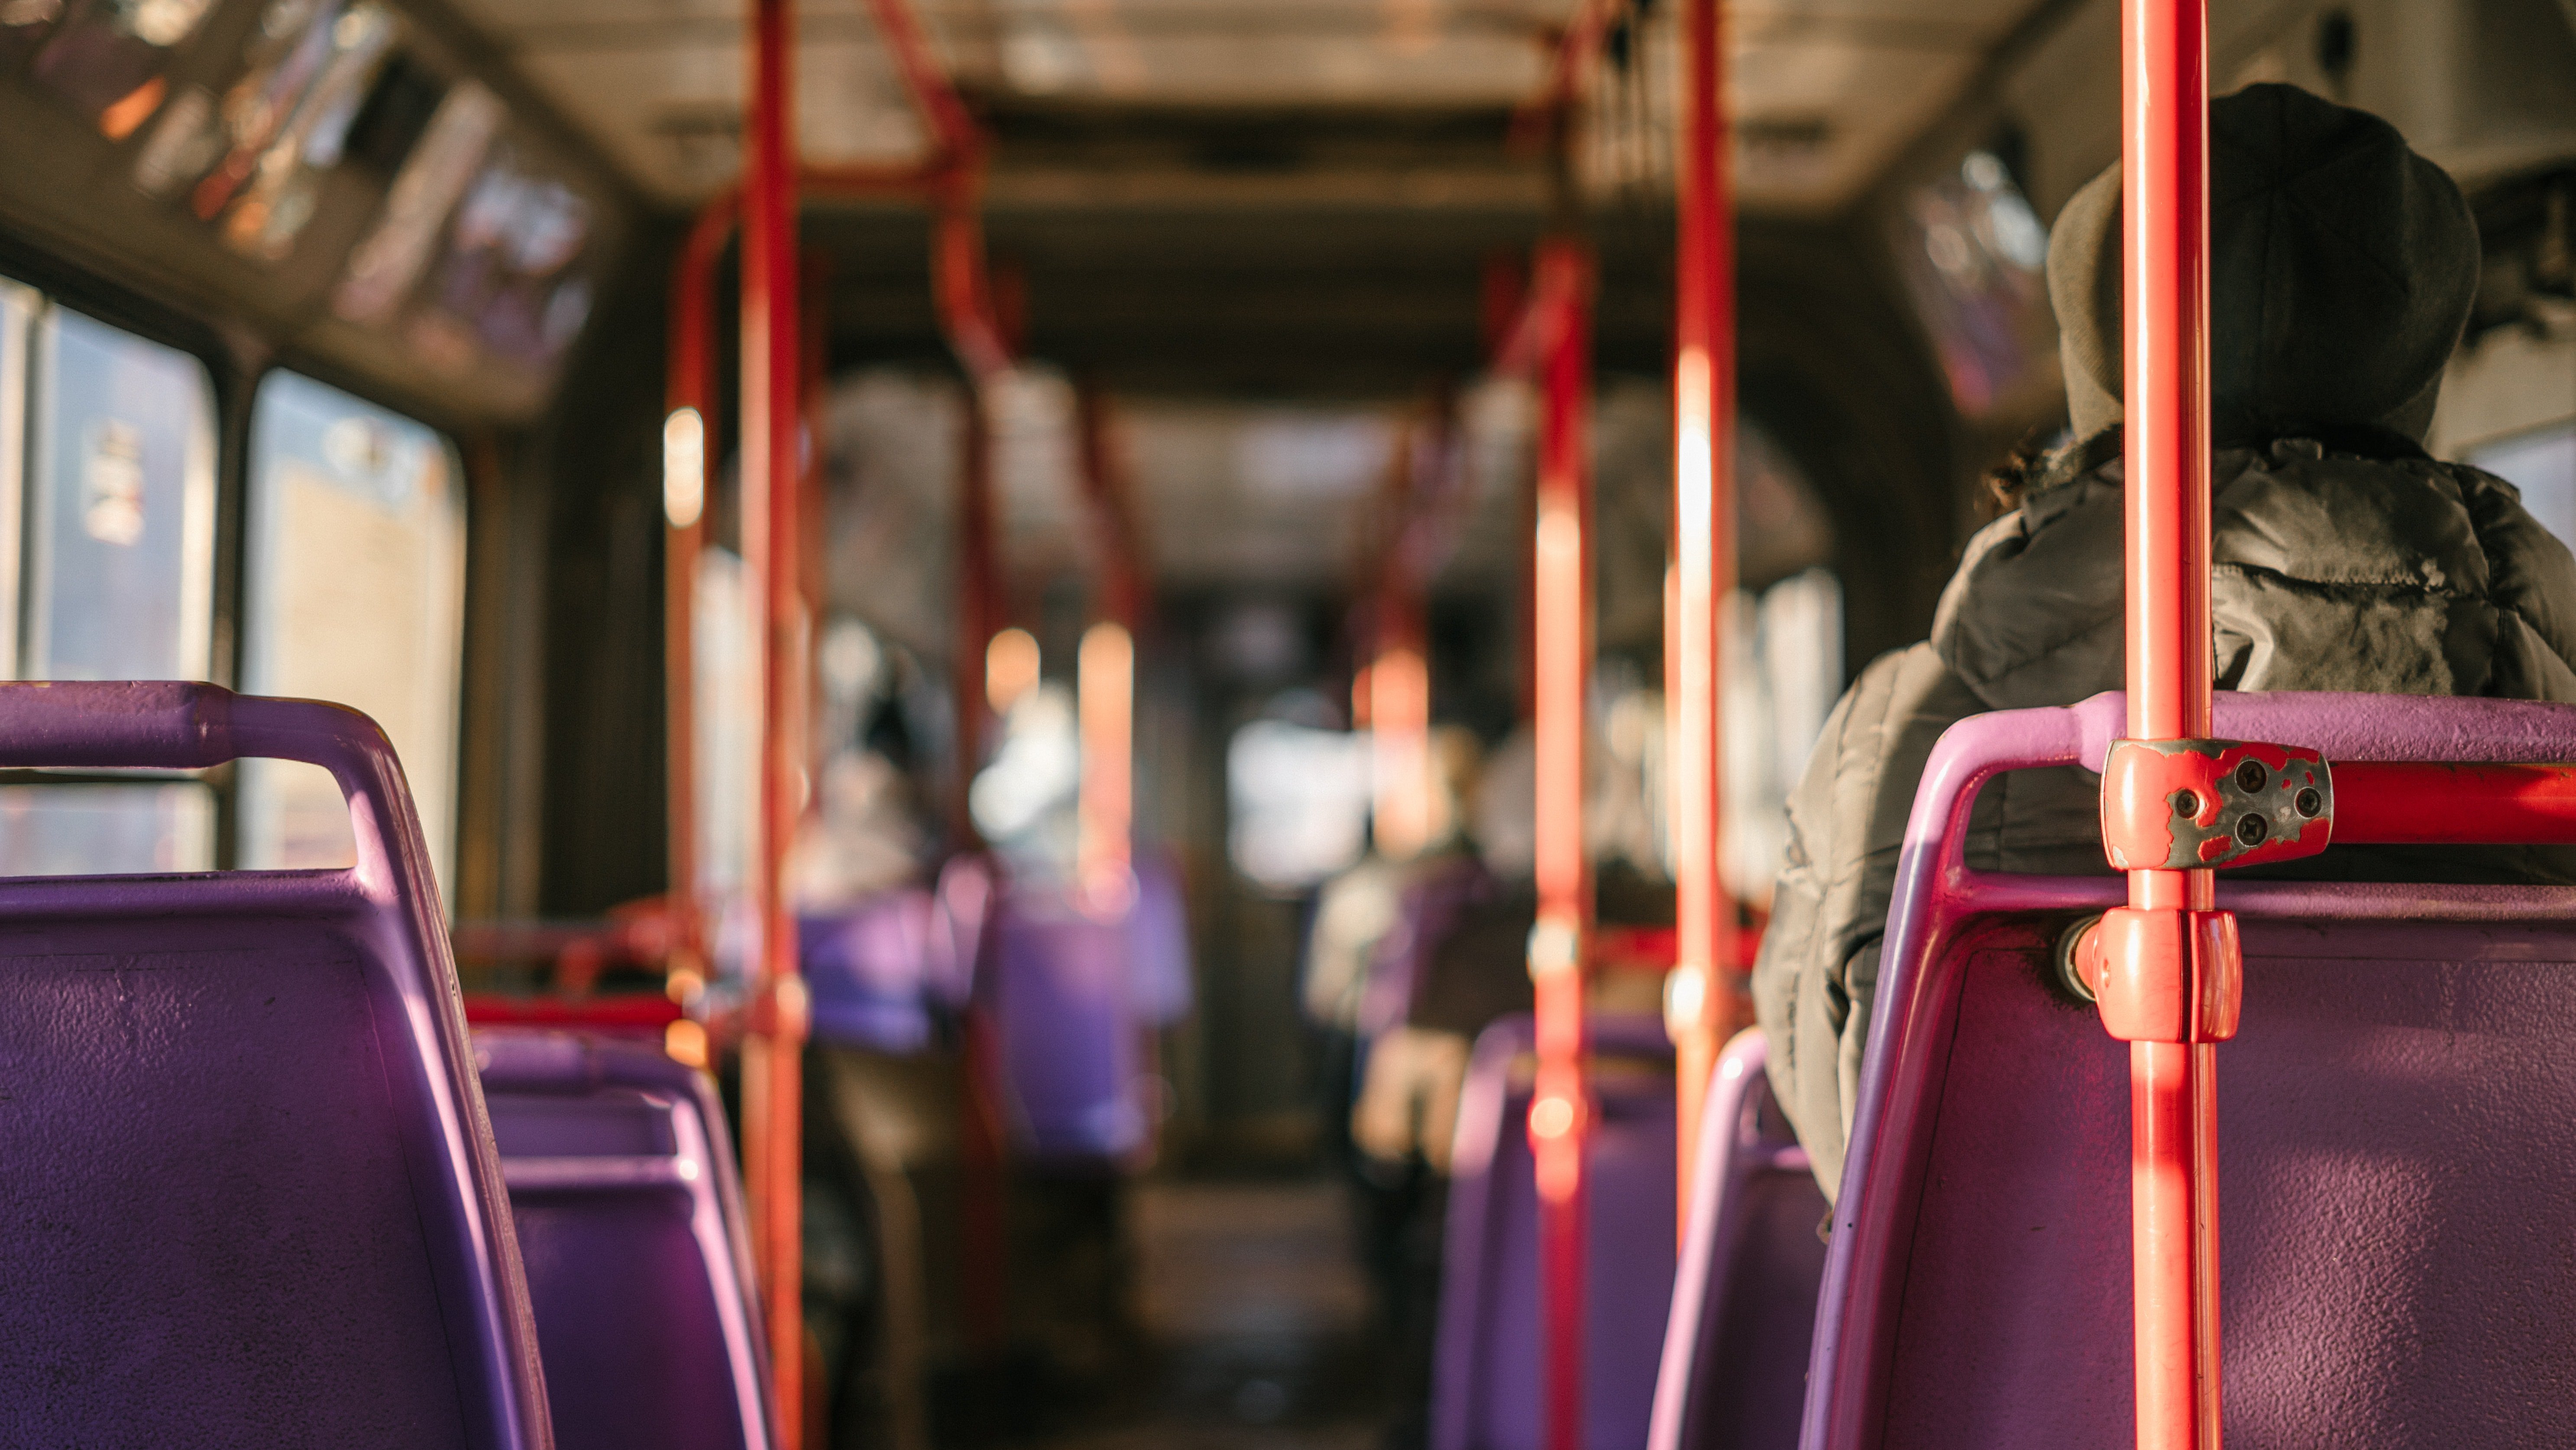 The girl noticed the bus was getting empty | Photo: Unsplash